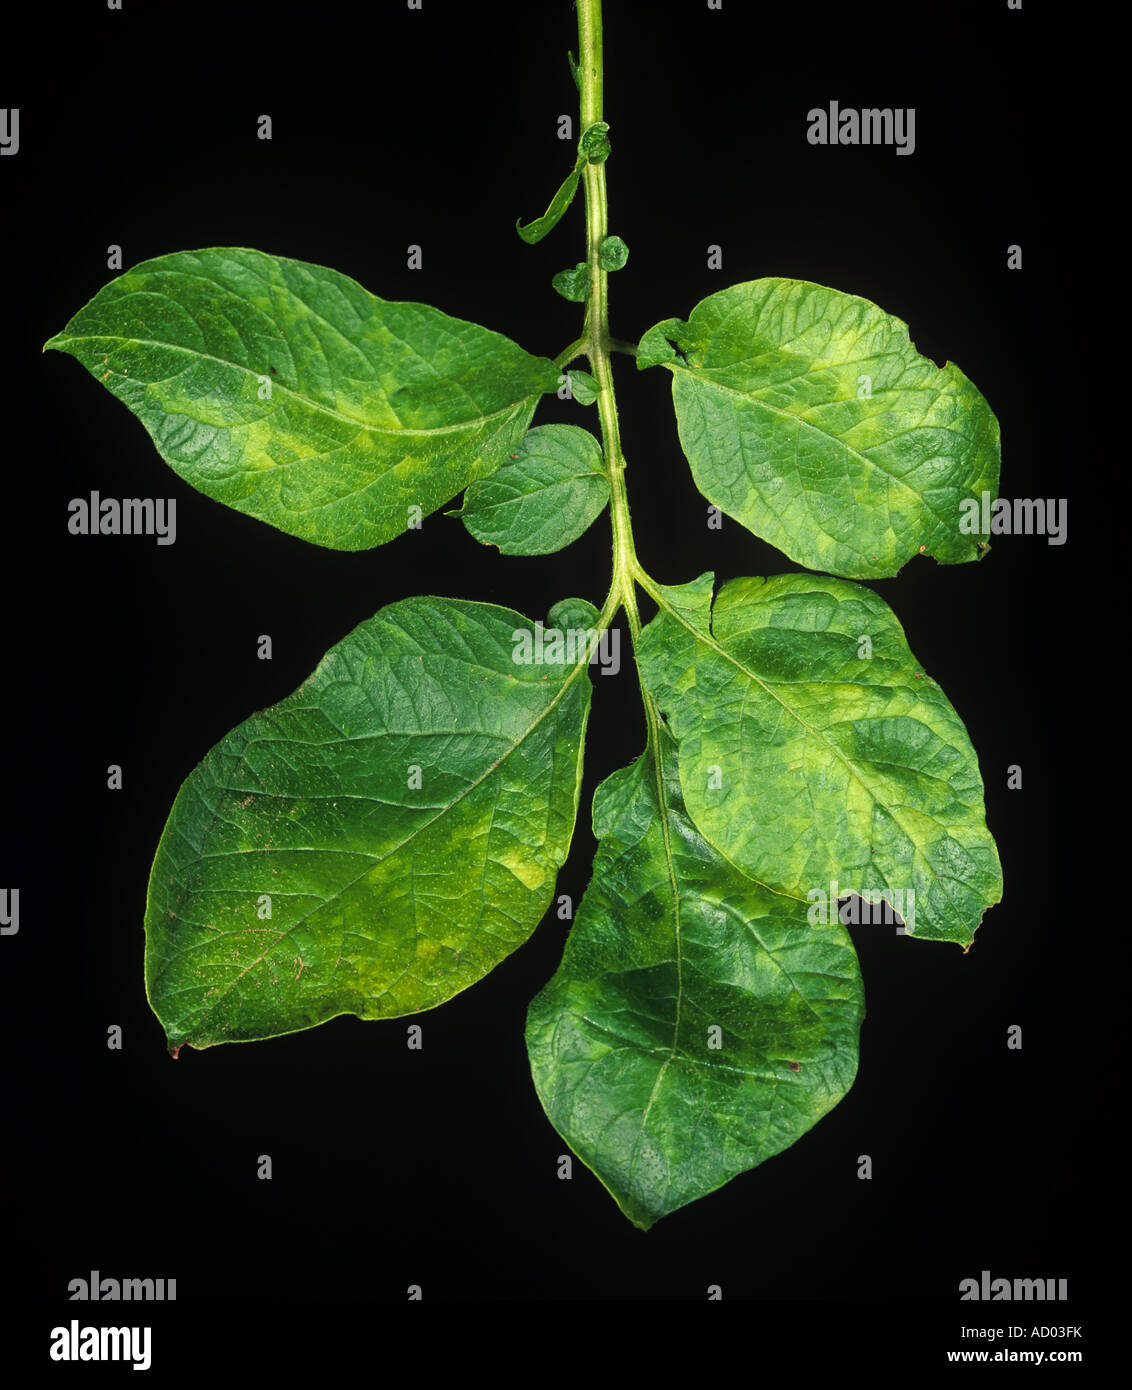 Severe typical symptoms of mosaic virus infection on a potato leaf Stock Photo